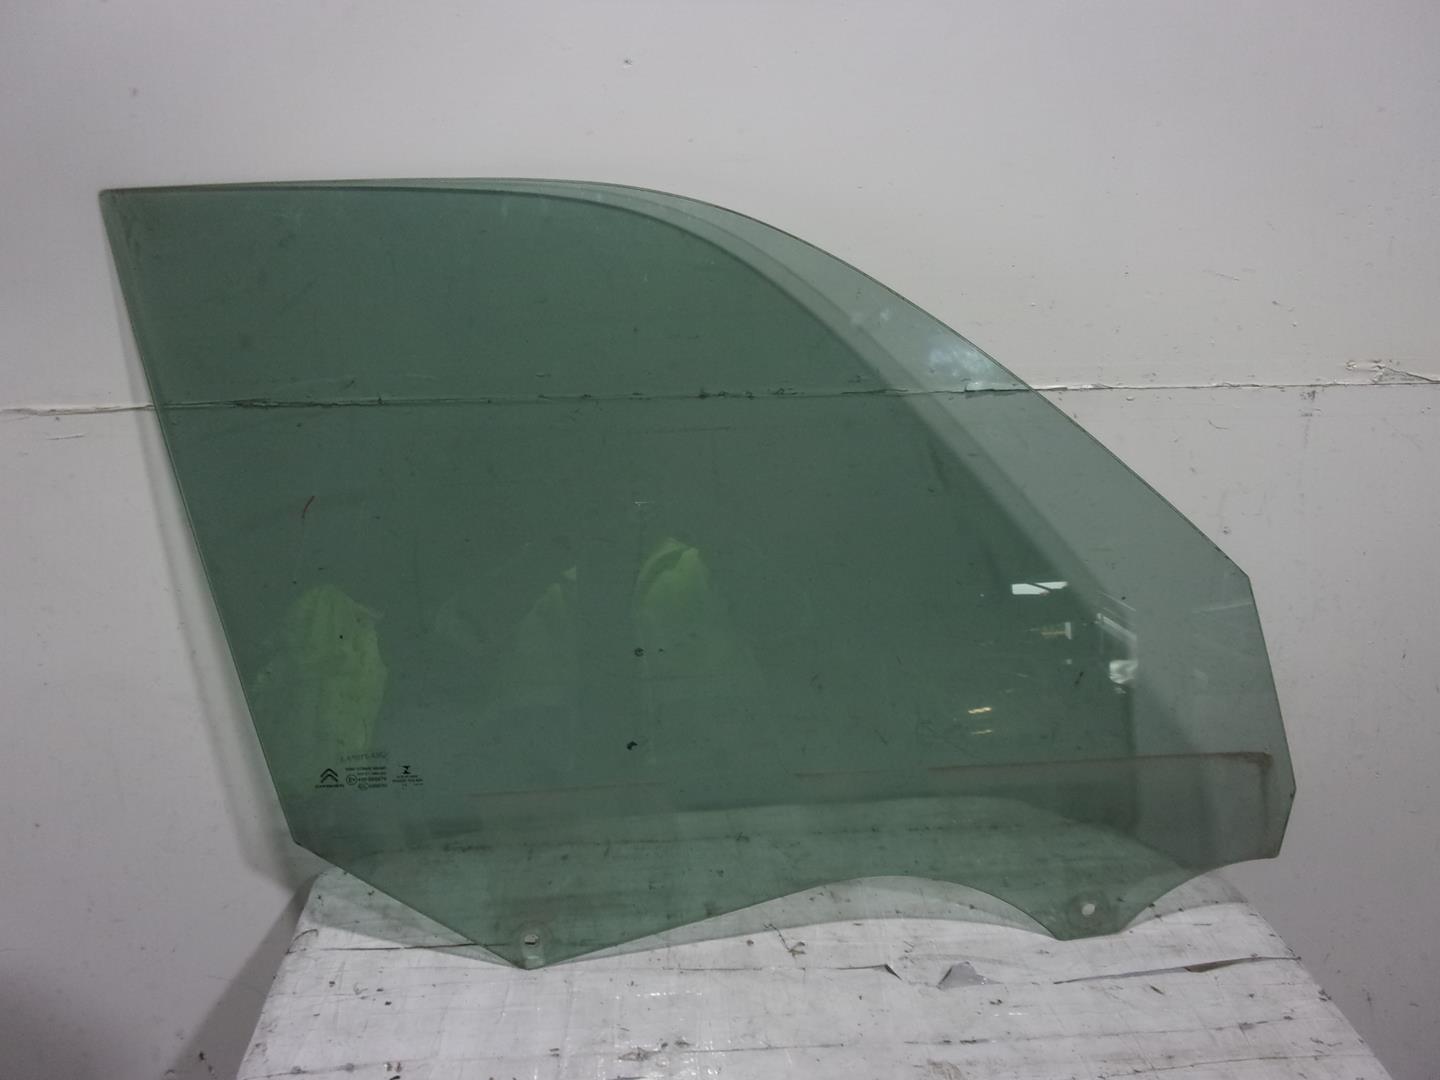 CITROËN C4 Picasso 2 generation (2013-2018) Front Right Door Window 9675833280, 43R000479, DOT211M86AS2 24211776